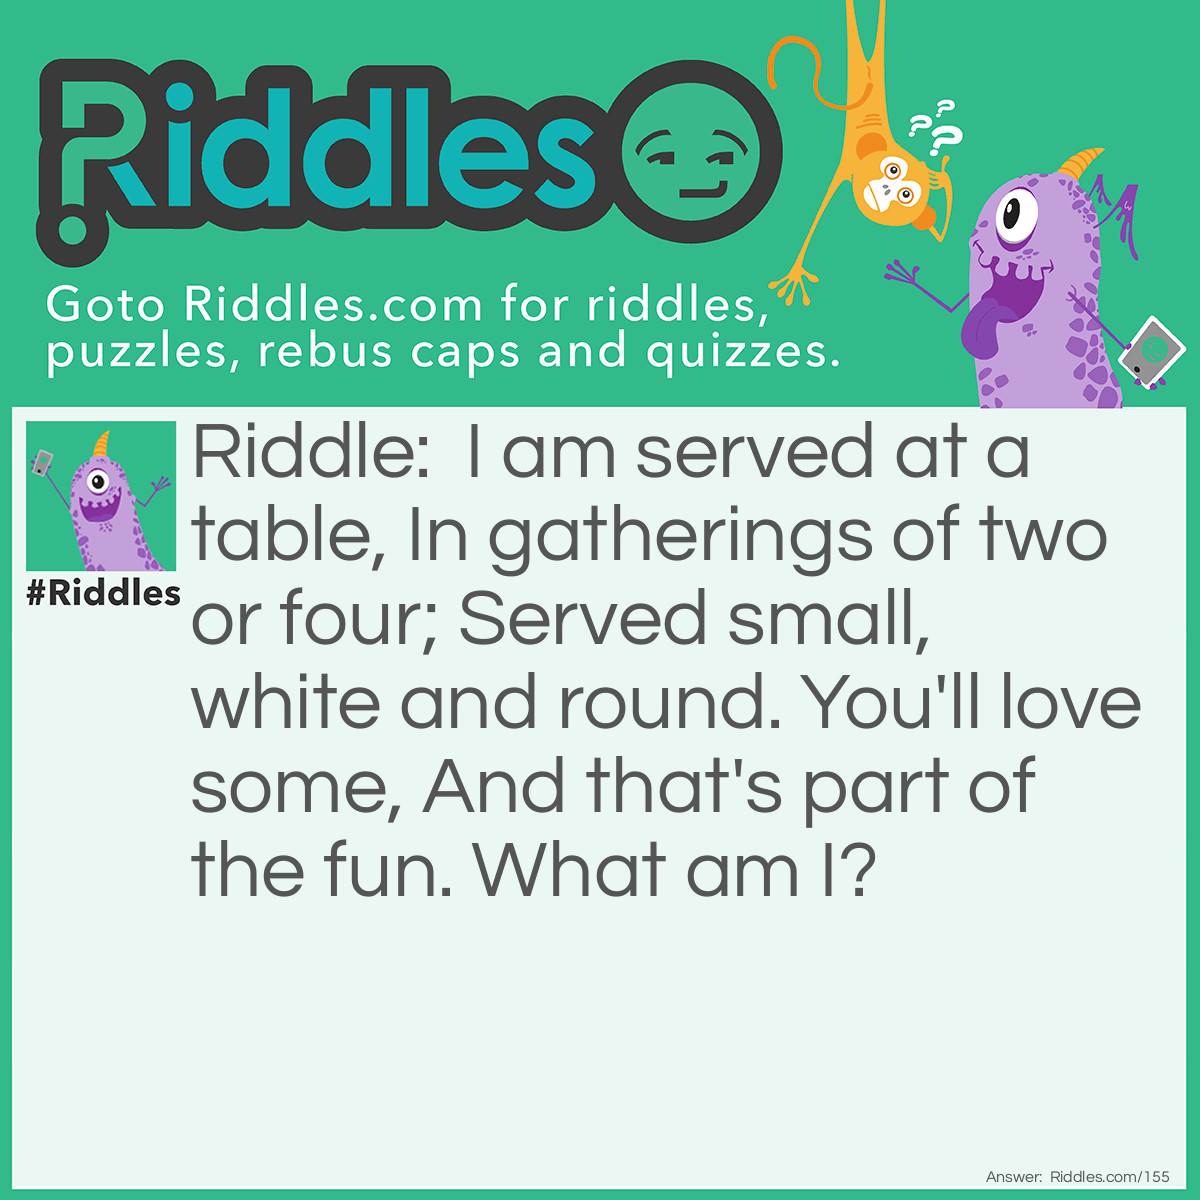 Riddle: I am served at a table, In gatherings of two or four; Served small, white and round. You'll love some, And that's part of the fun. What am I? Answer: Ping Pong Balls.